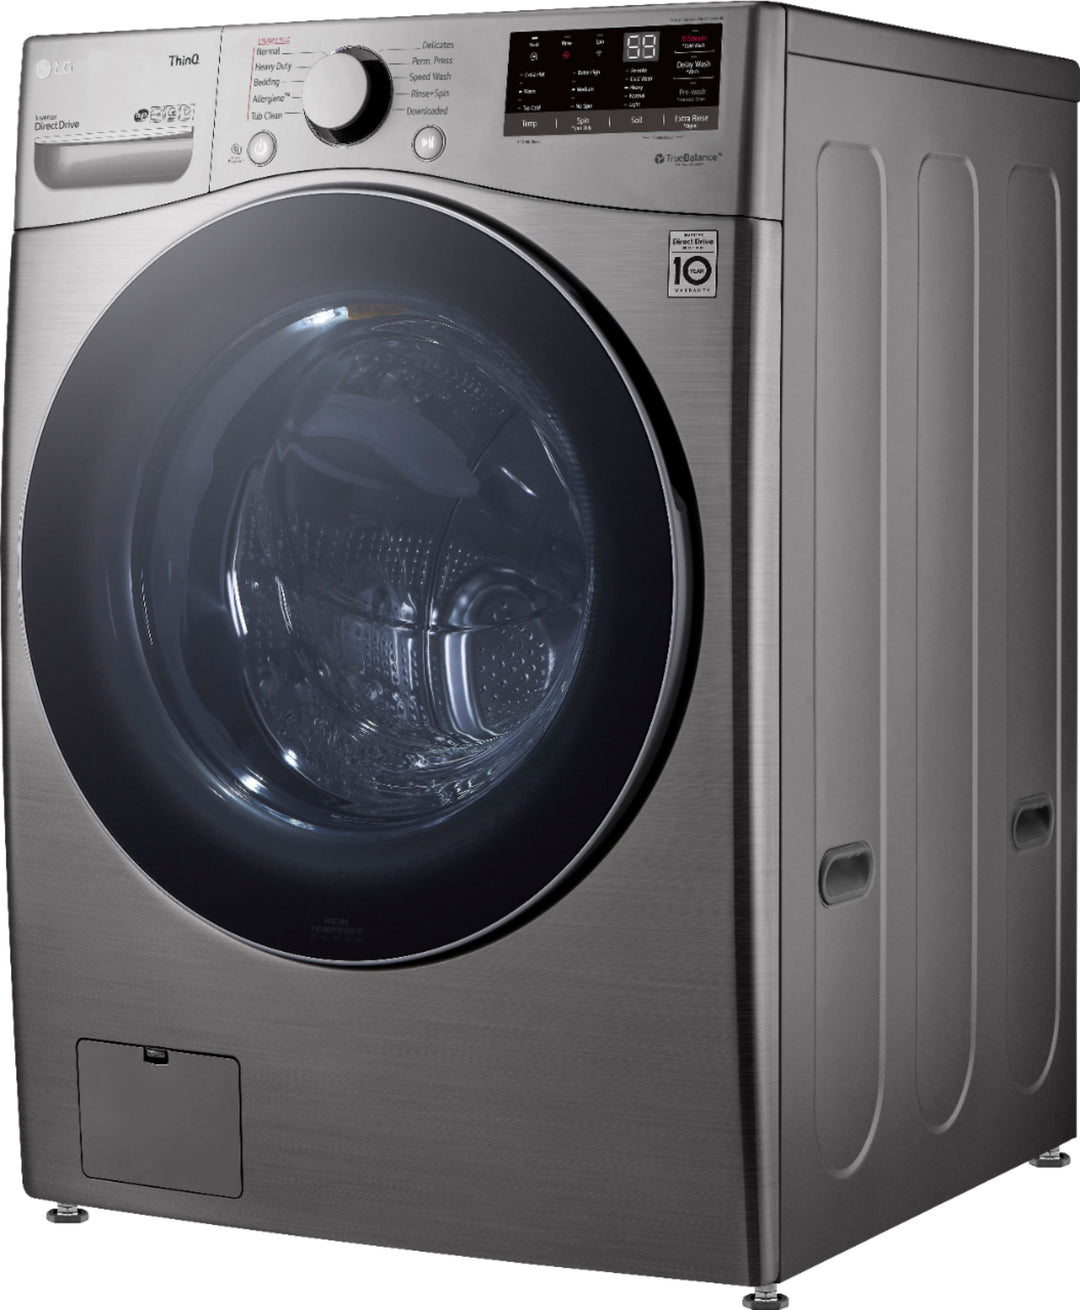 LG - 4.5 Cu. Ft. High-Efficiency Stackable Smart Front Load Washer with Steam and 6Motion Technology - Graphite steel_12